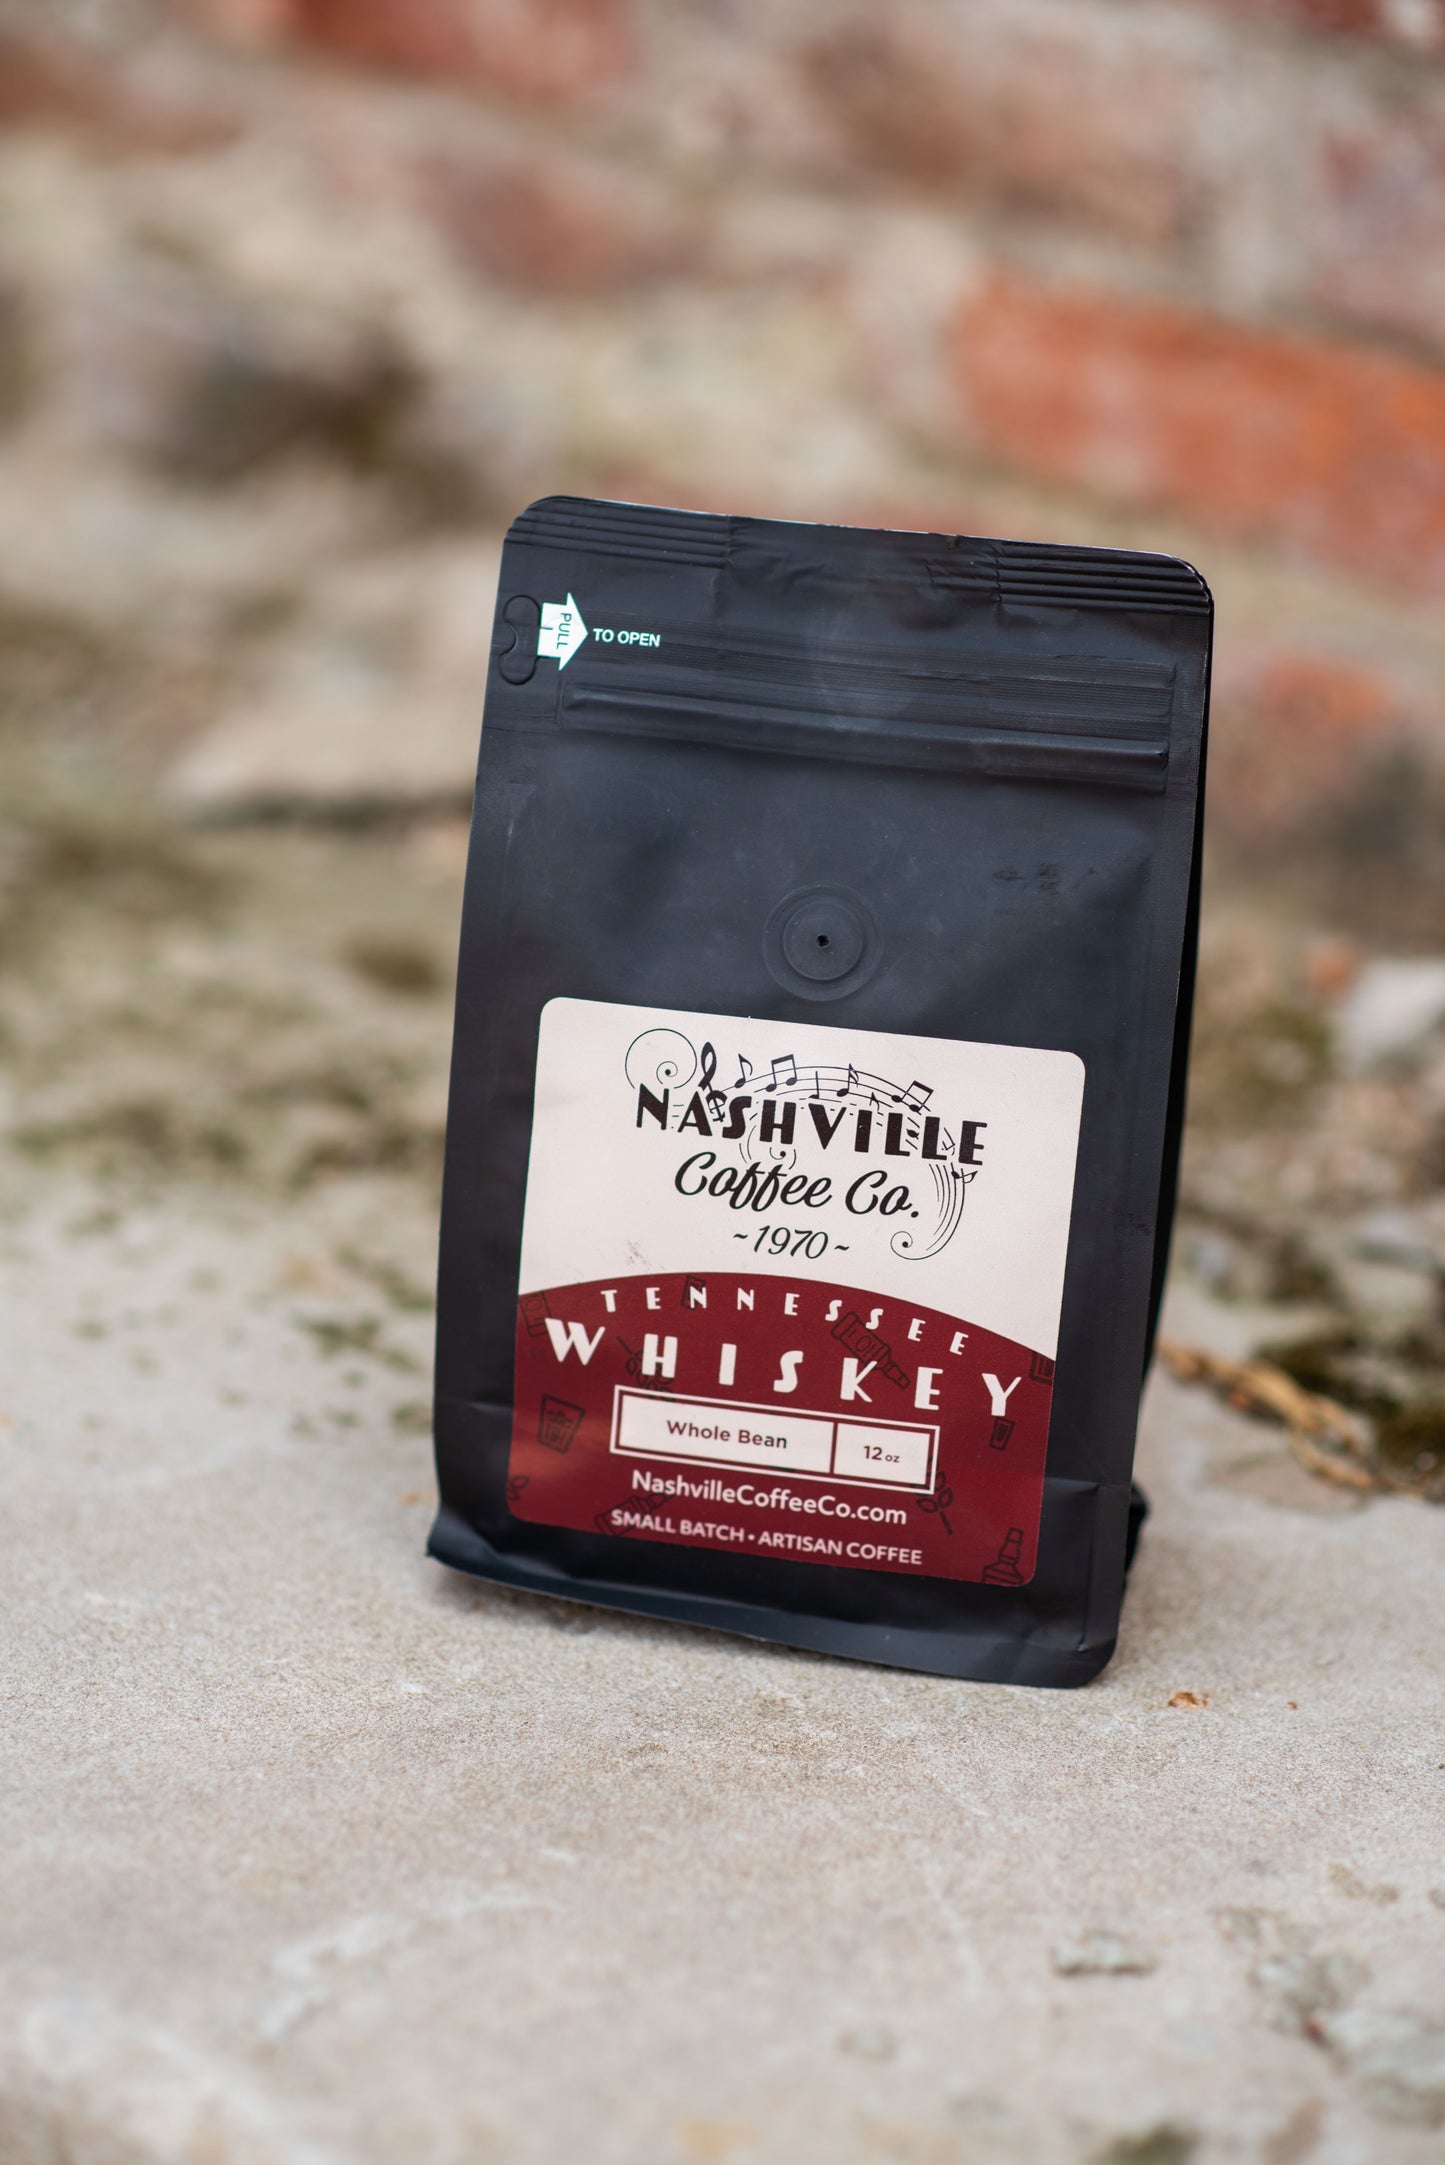 Nashville Coffee Co “Tennessee Whiskey” 12oz Whole Bean Bag